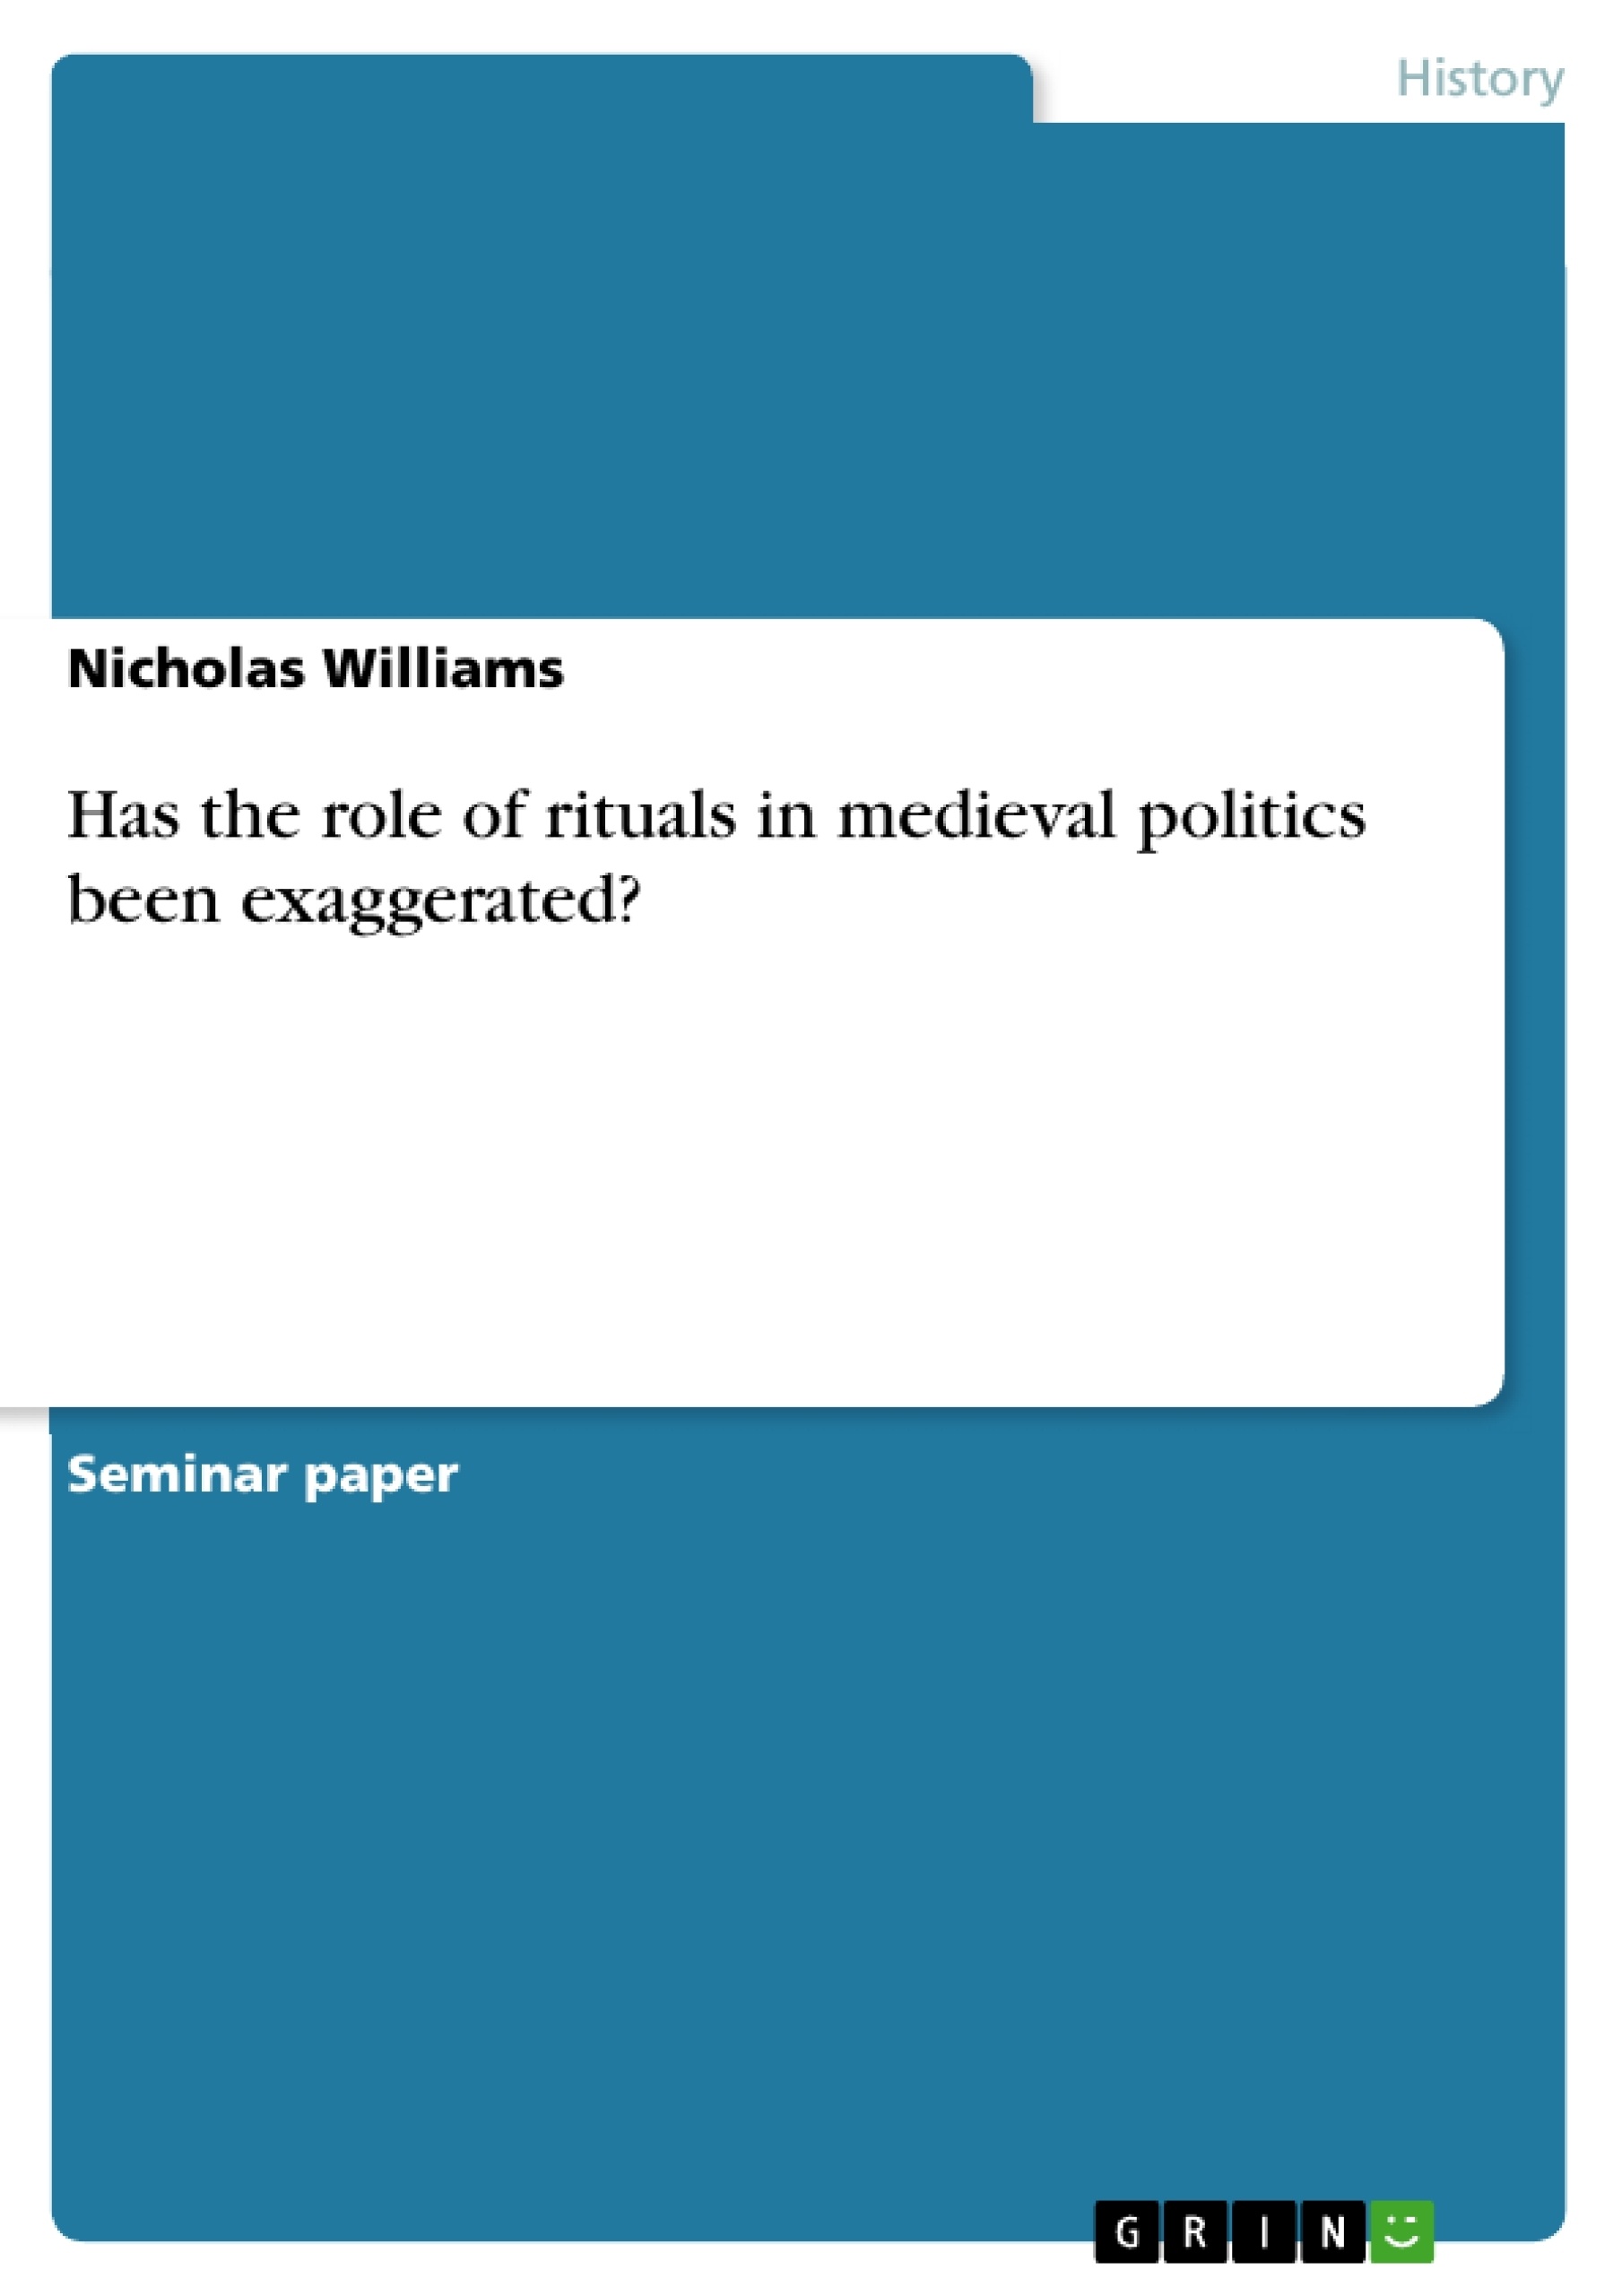 Title: Has the role of rituals in medieval politics been exaggerated?